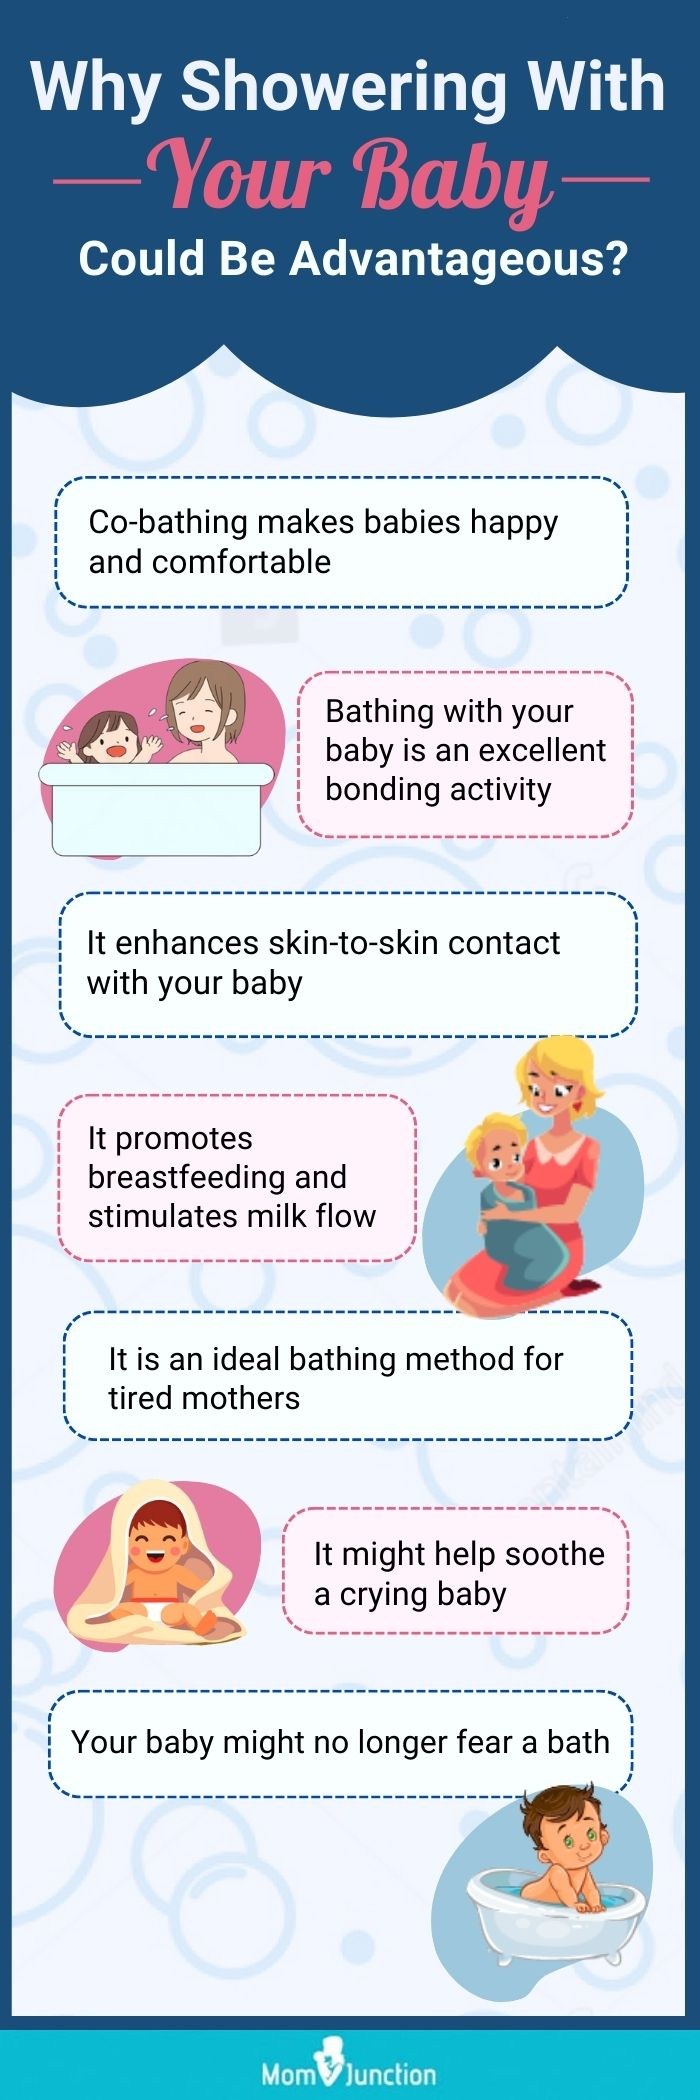 benefits of showering with the baby (infographic)